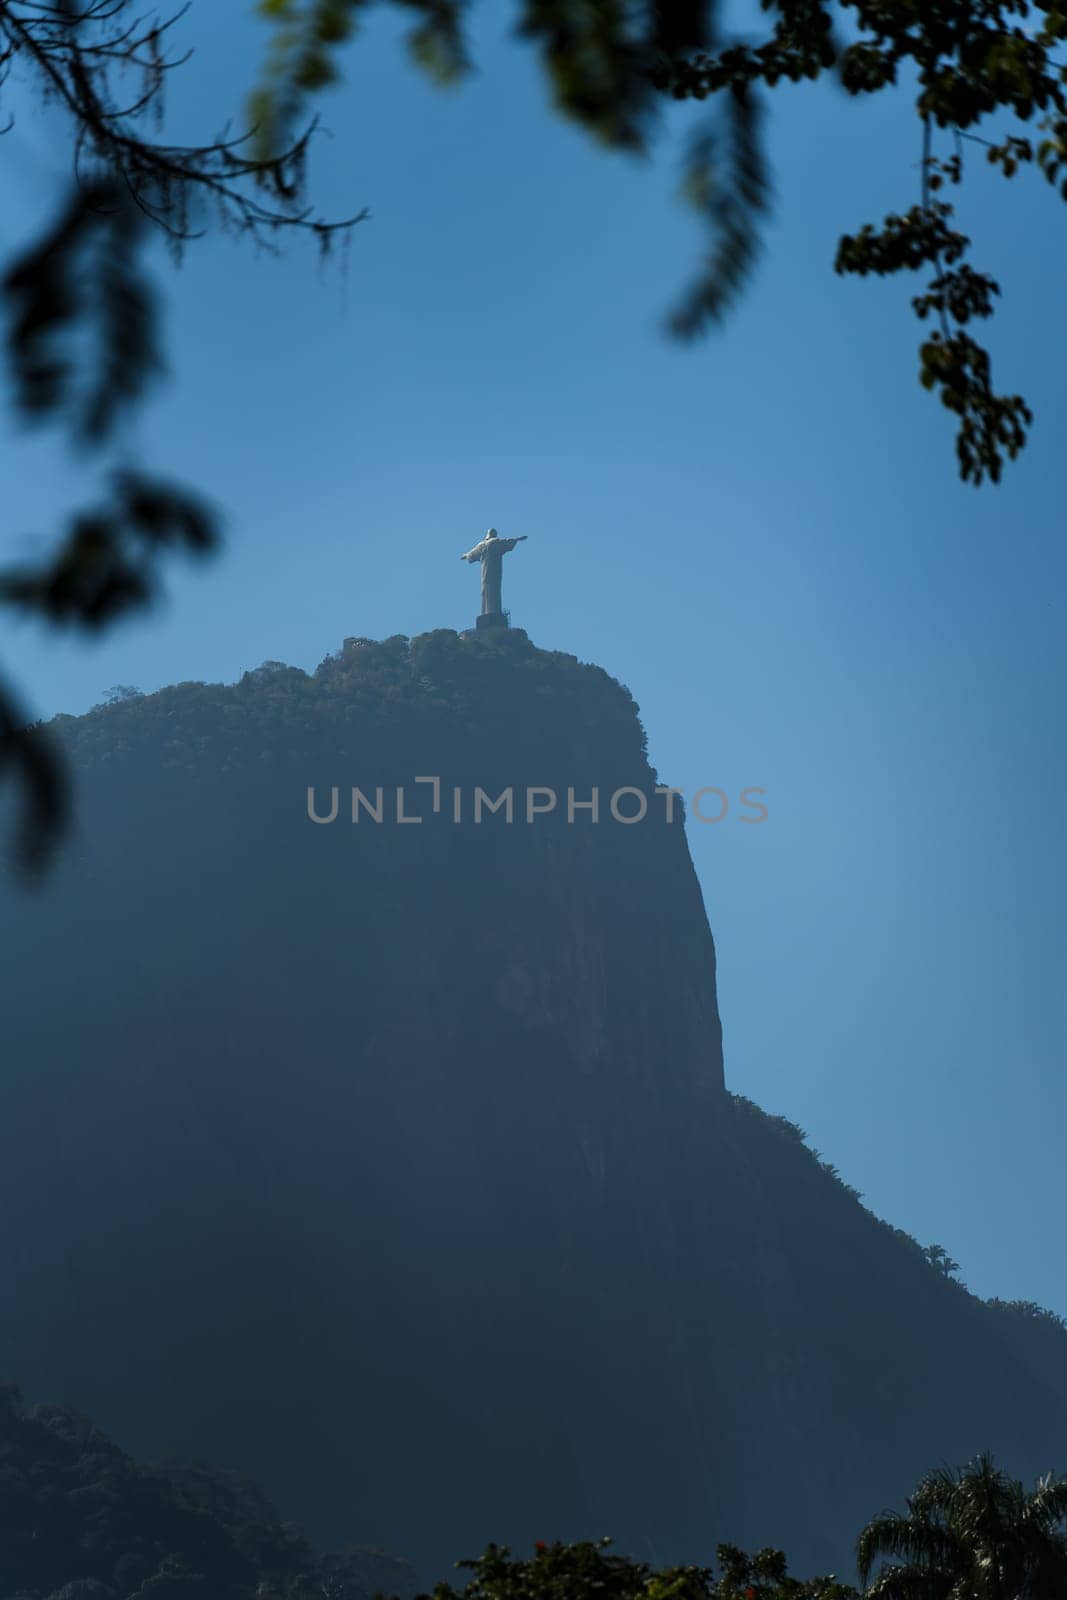 "Christ the Redeemer and mountain silhouette in Rio de Janeiro, framed by trees against a clear blue sky."